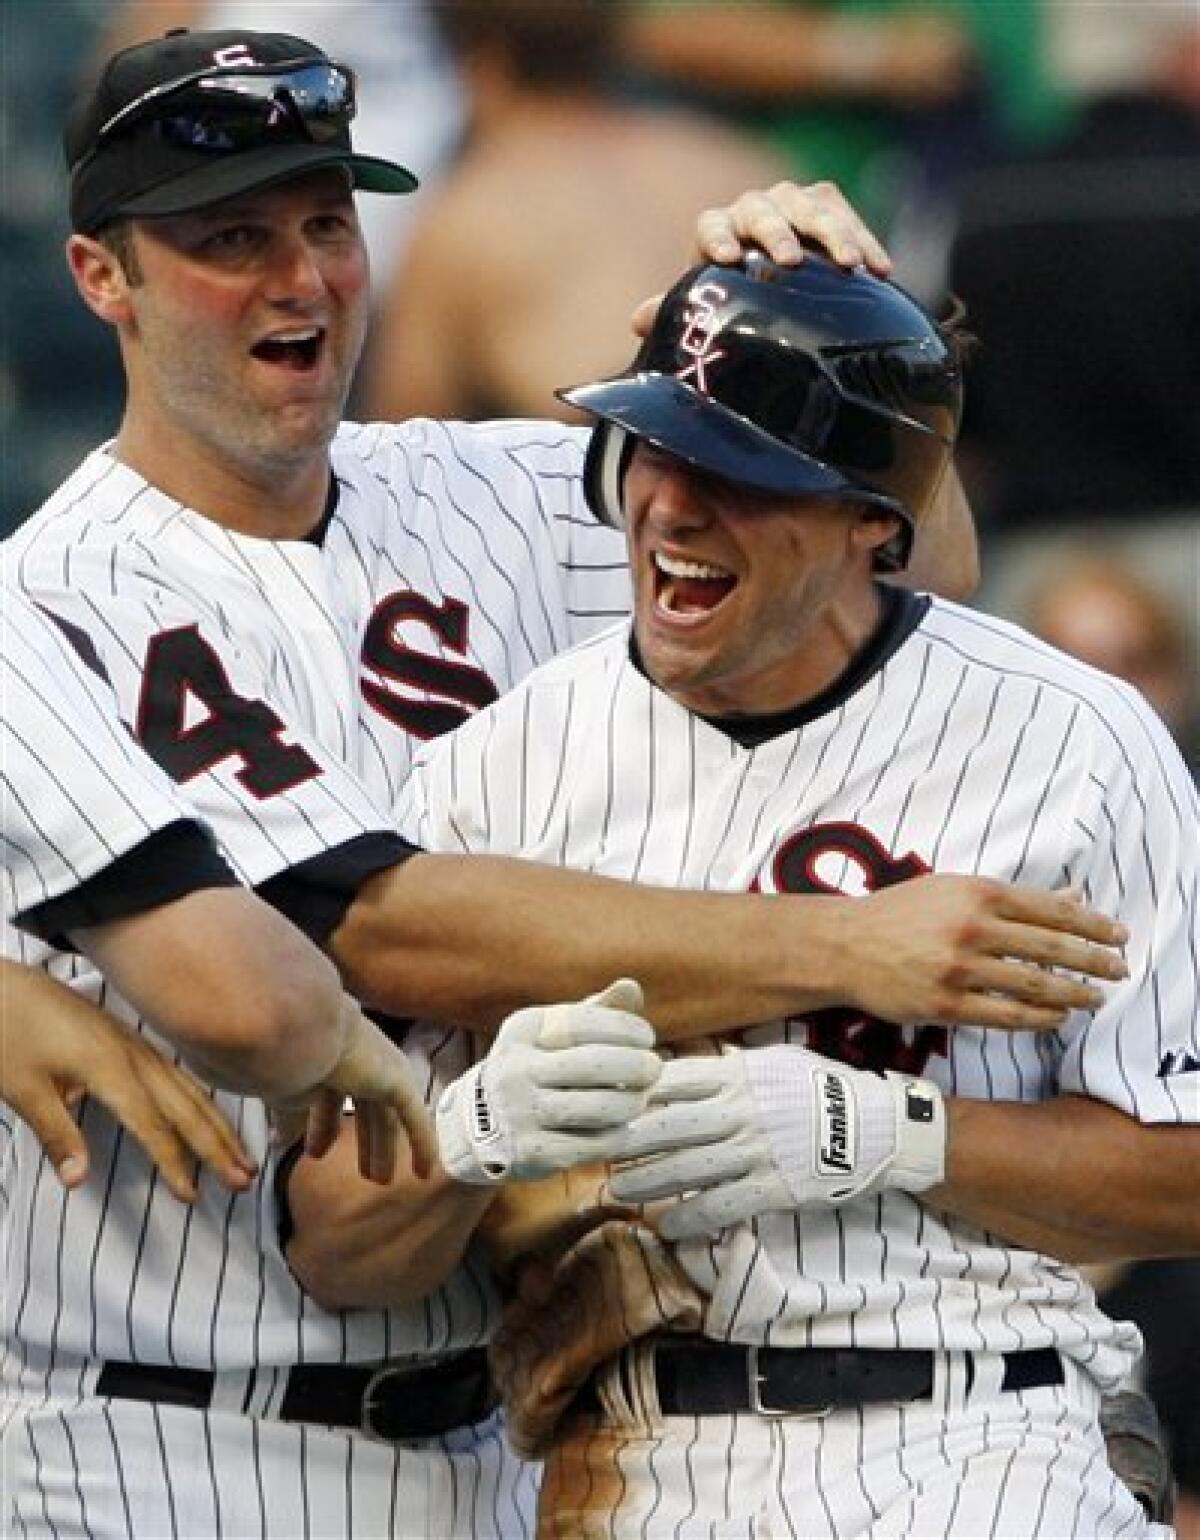 FILE - In this June 25, 2009, file photo, Chicago White Sox's Scott Podsednik, right, celebrates with Paul Konerko after Podsednik drove in the winning run against the Los Angeles Dodgers during the 13th inning of an interleague baseball game in Chicago. A Kansas City Royals spokesman said Friday, Jan. 8, 2010, that Podsednik would take a physical later Friday and possibly sign immediately afterward. Terms of the deal were not immediately known. (AP Photo/Nam Y. Huh, File)